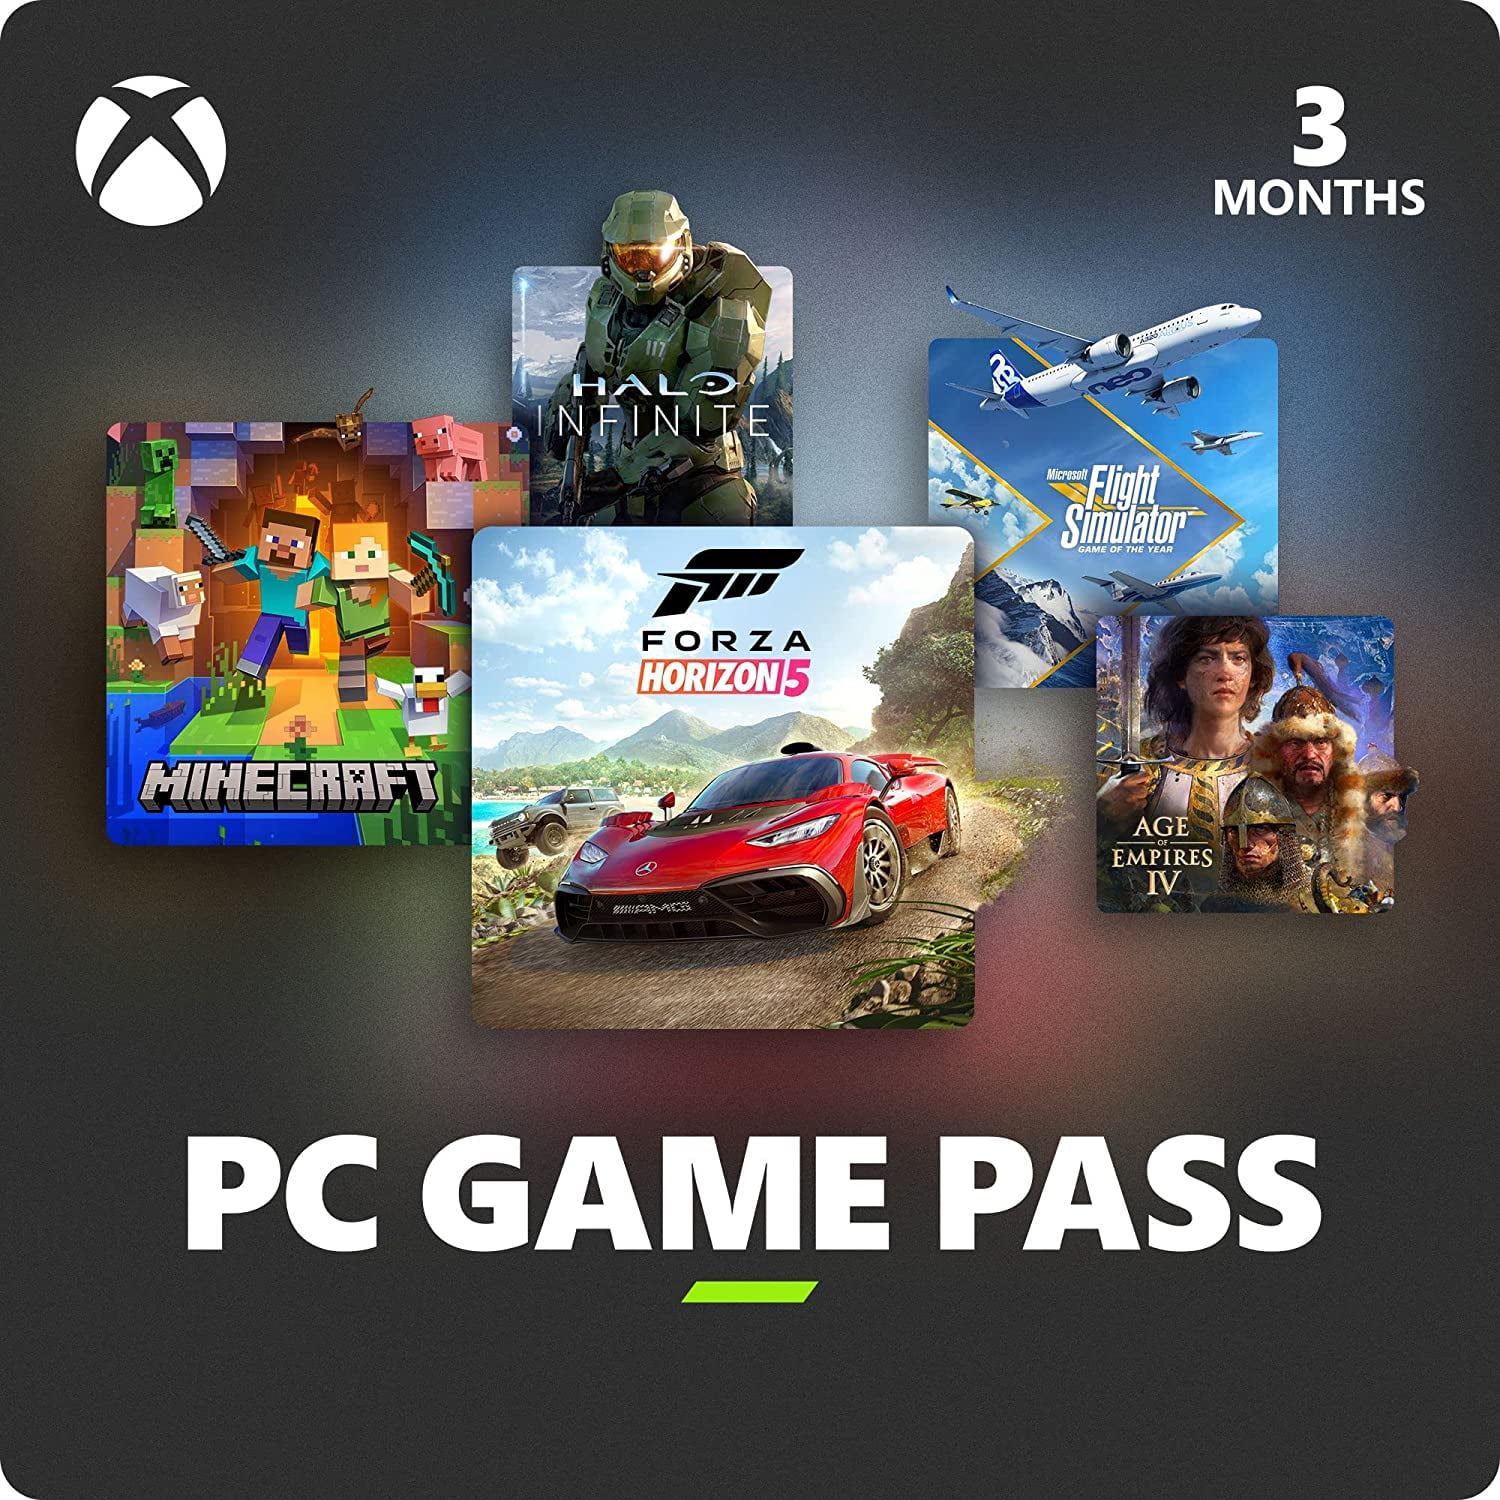 Microsoft wants to stream PC Game Pass games, too